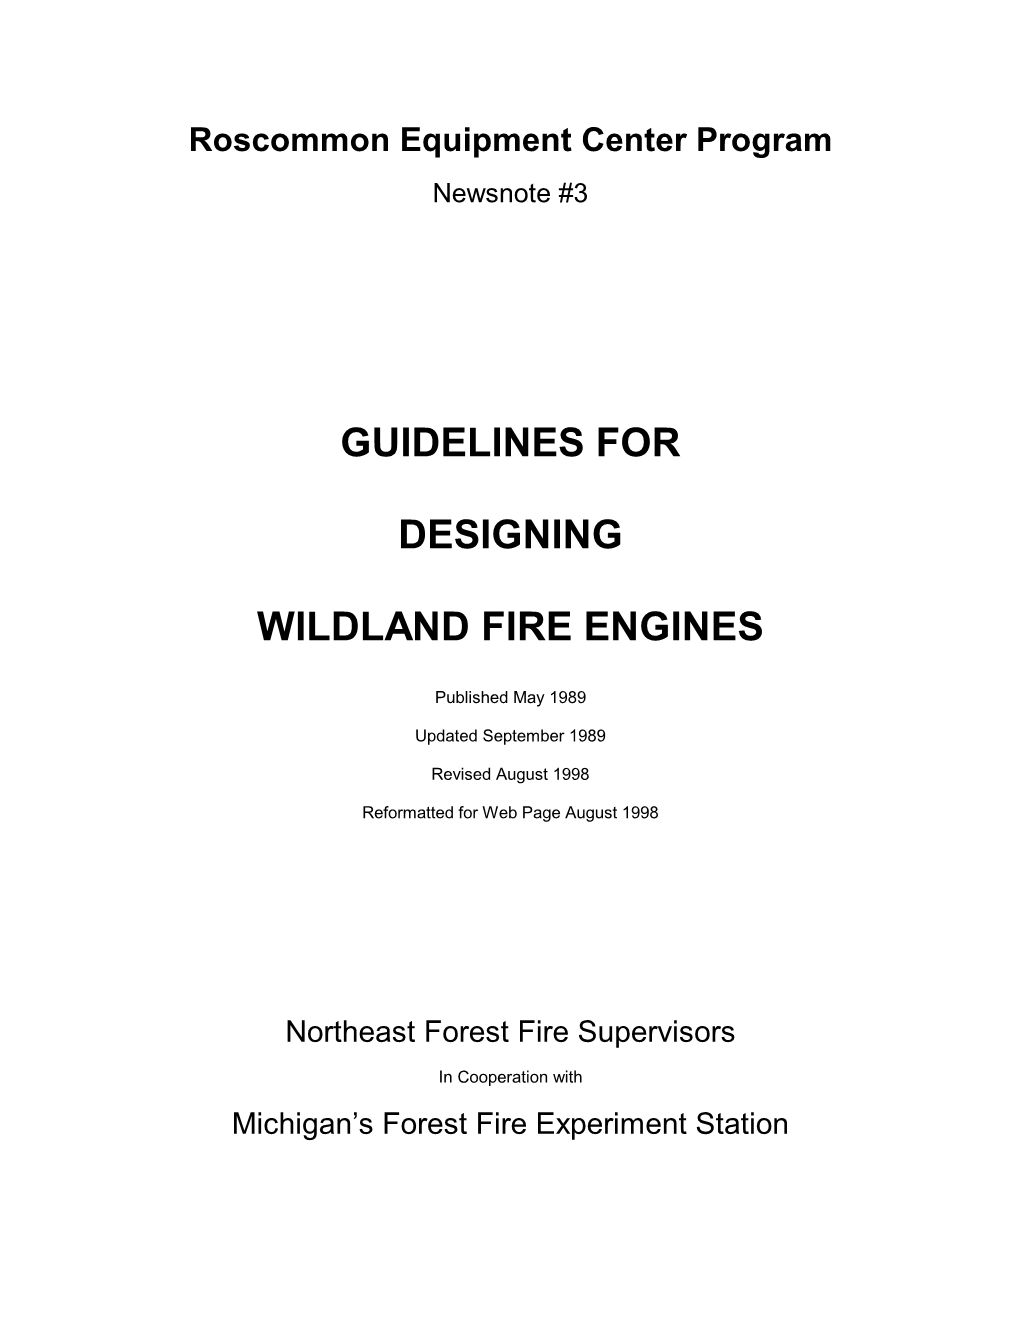 Guidelines for Designing Wildland Fire Engines